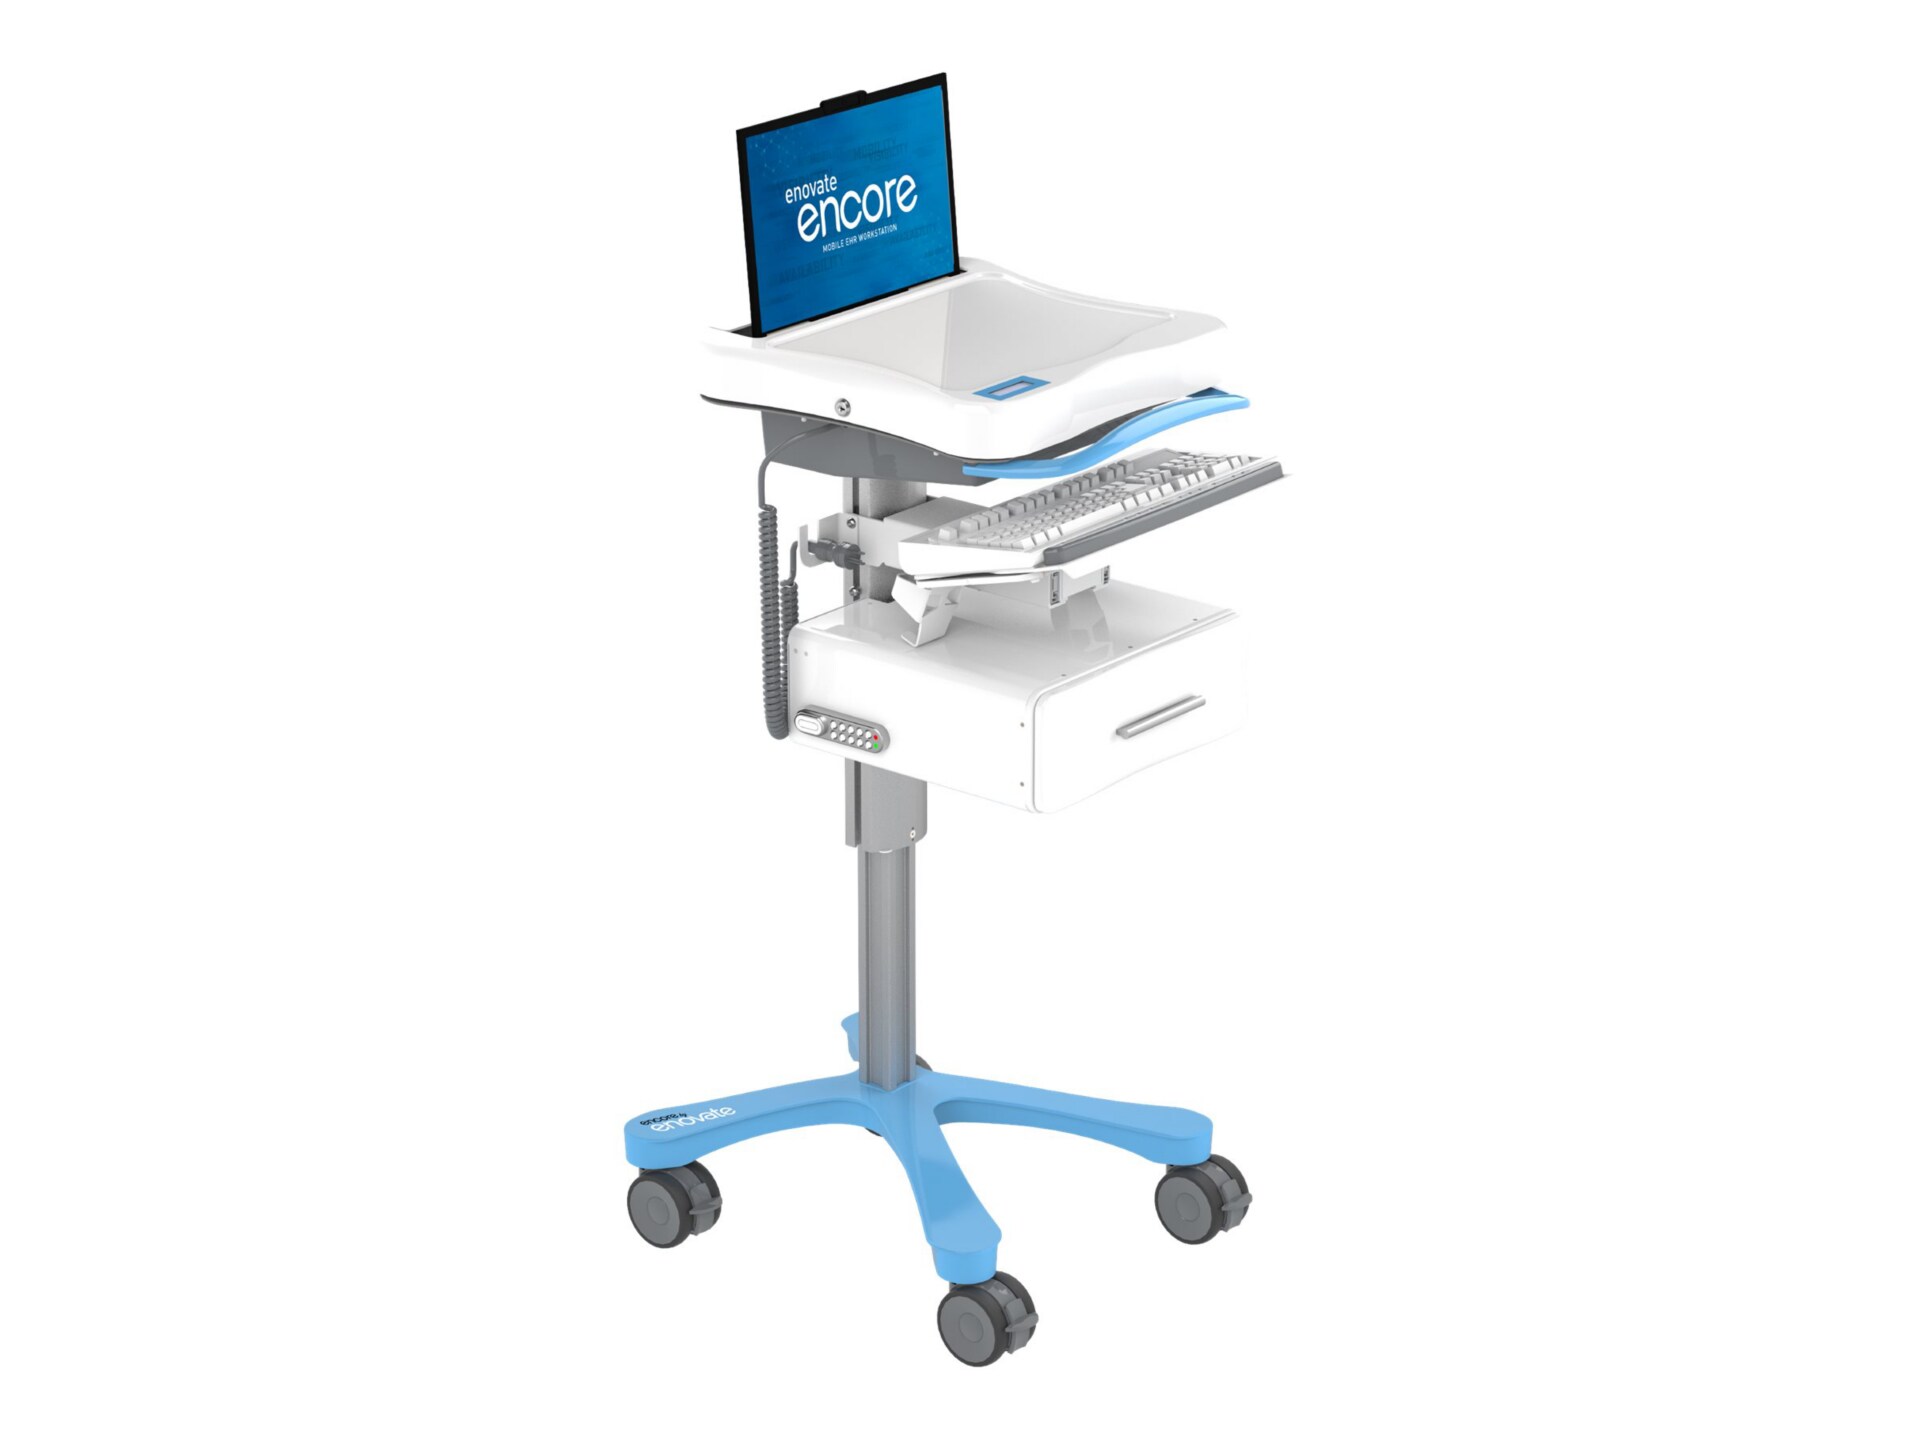 Enovate Medical Encore cart - for notebook / keyboard / mouse